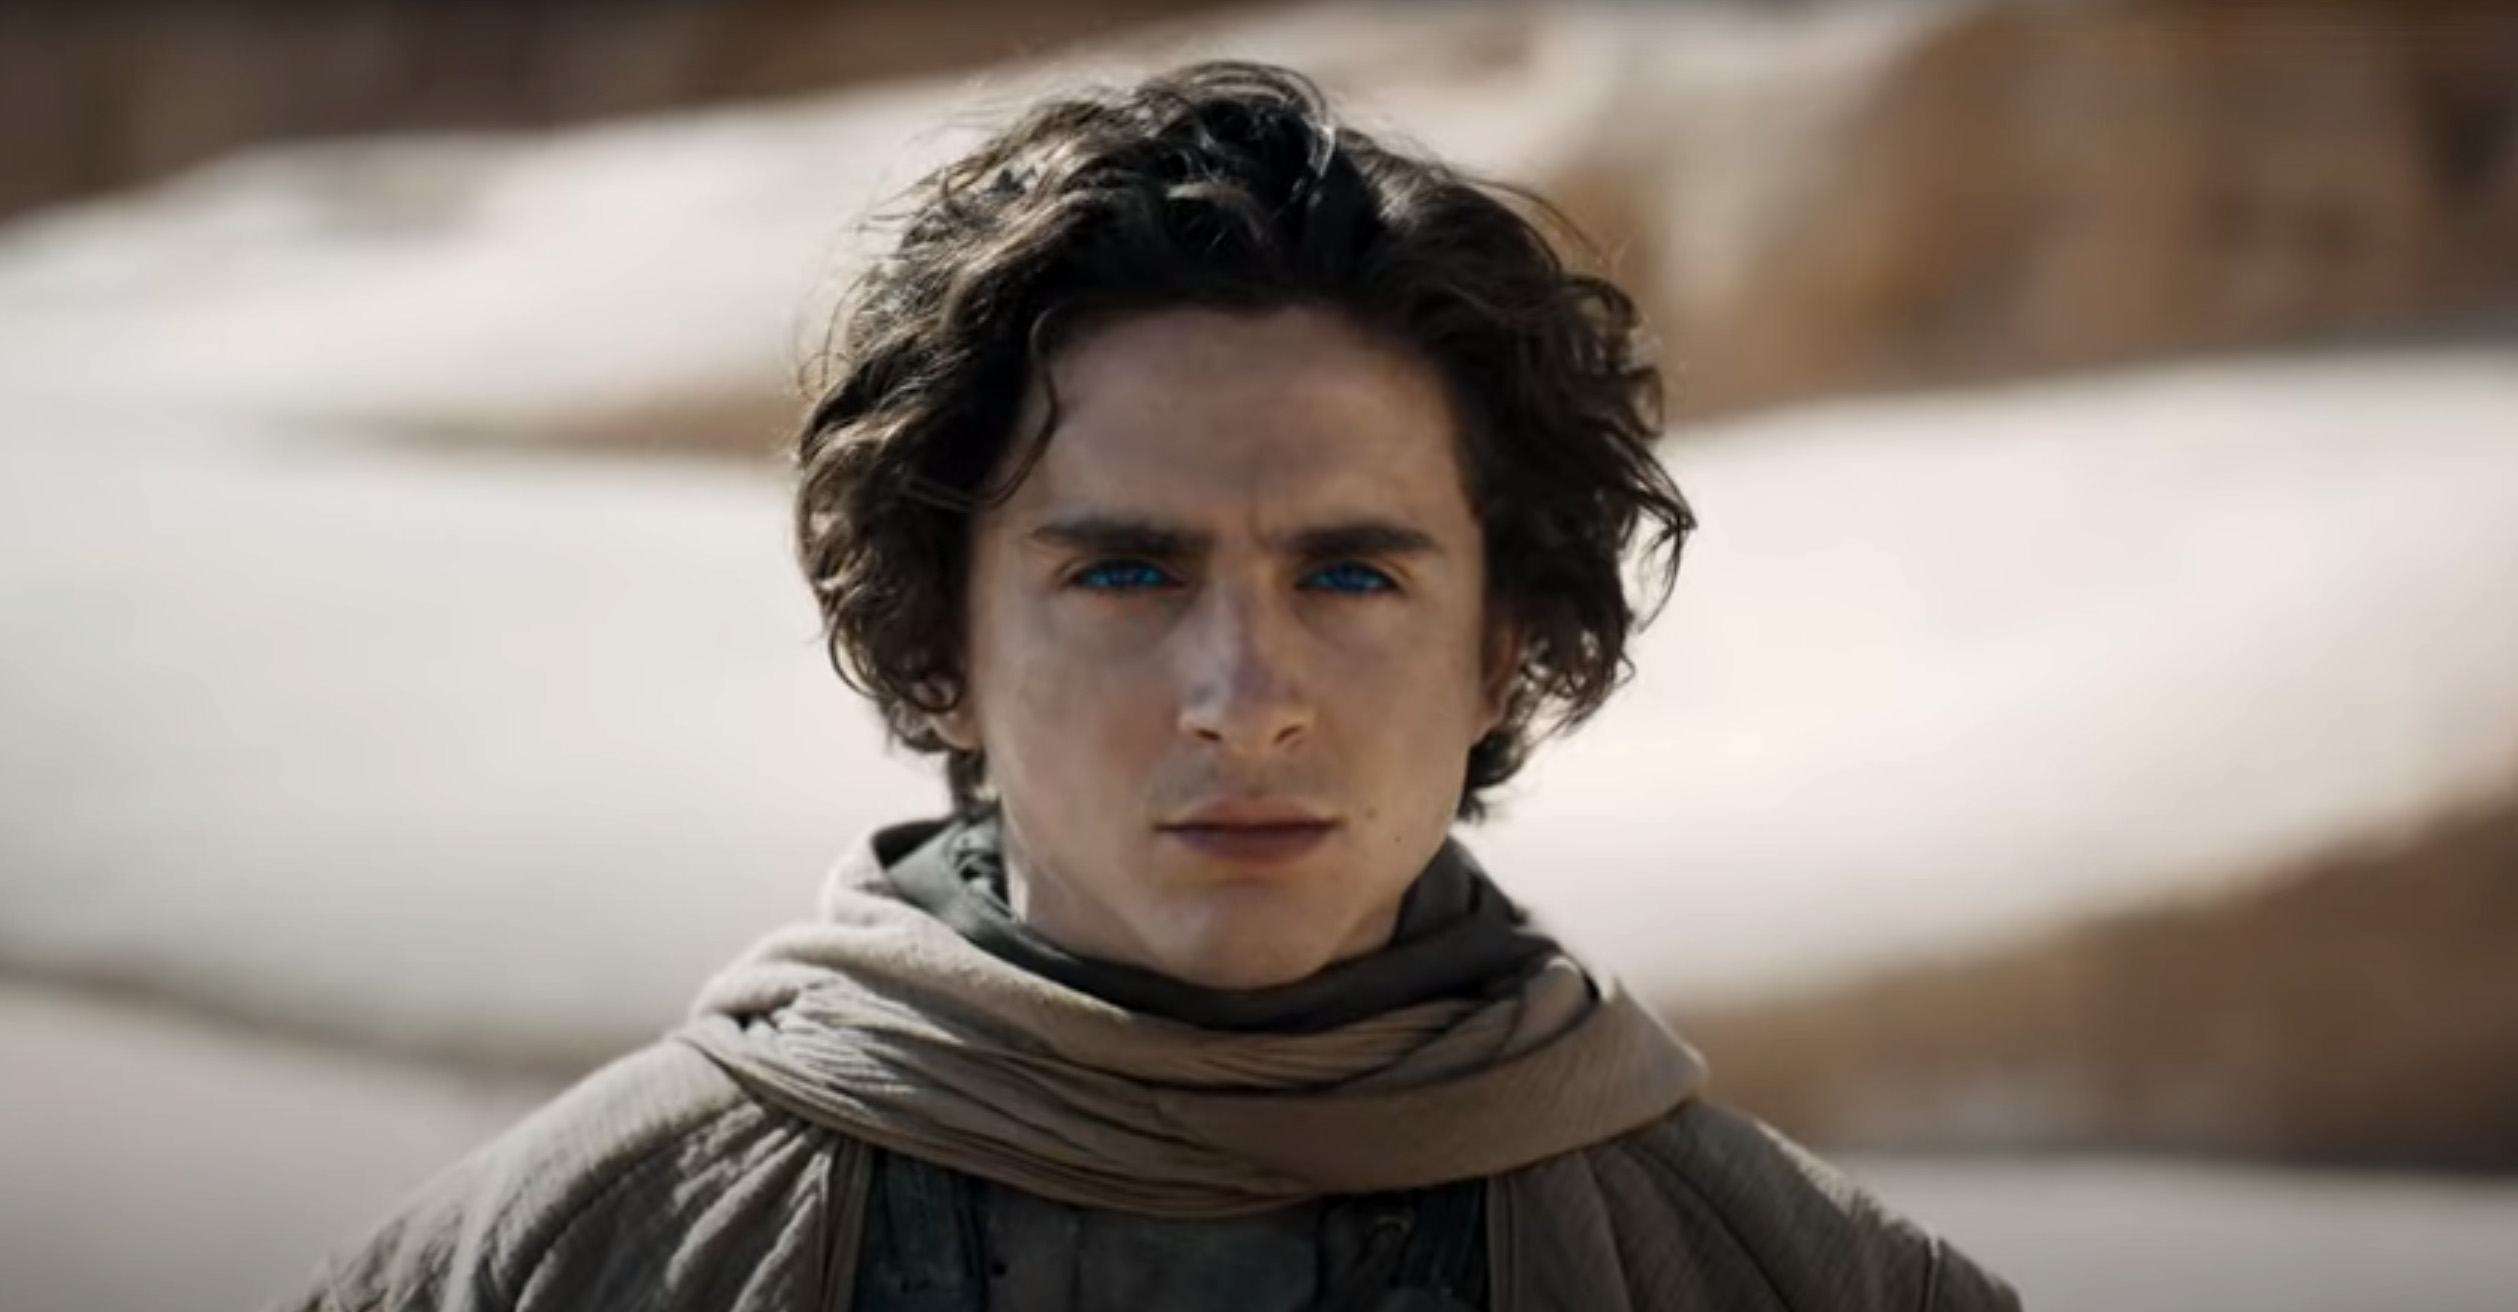 PHOTO: Timothée Chalamet is shown as Paul Atreides in a scene from "Dune: Part Two."